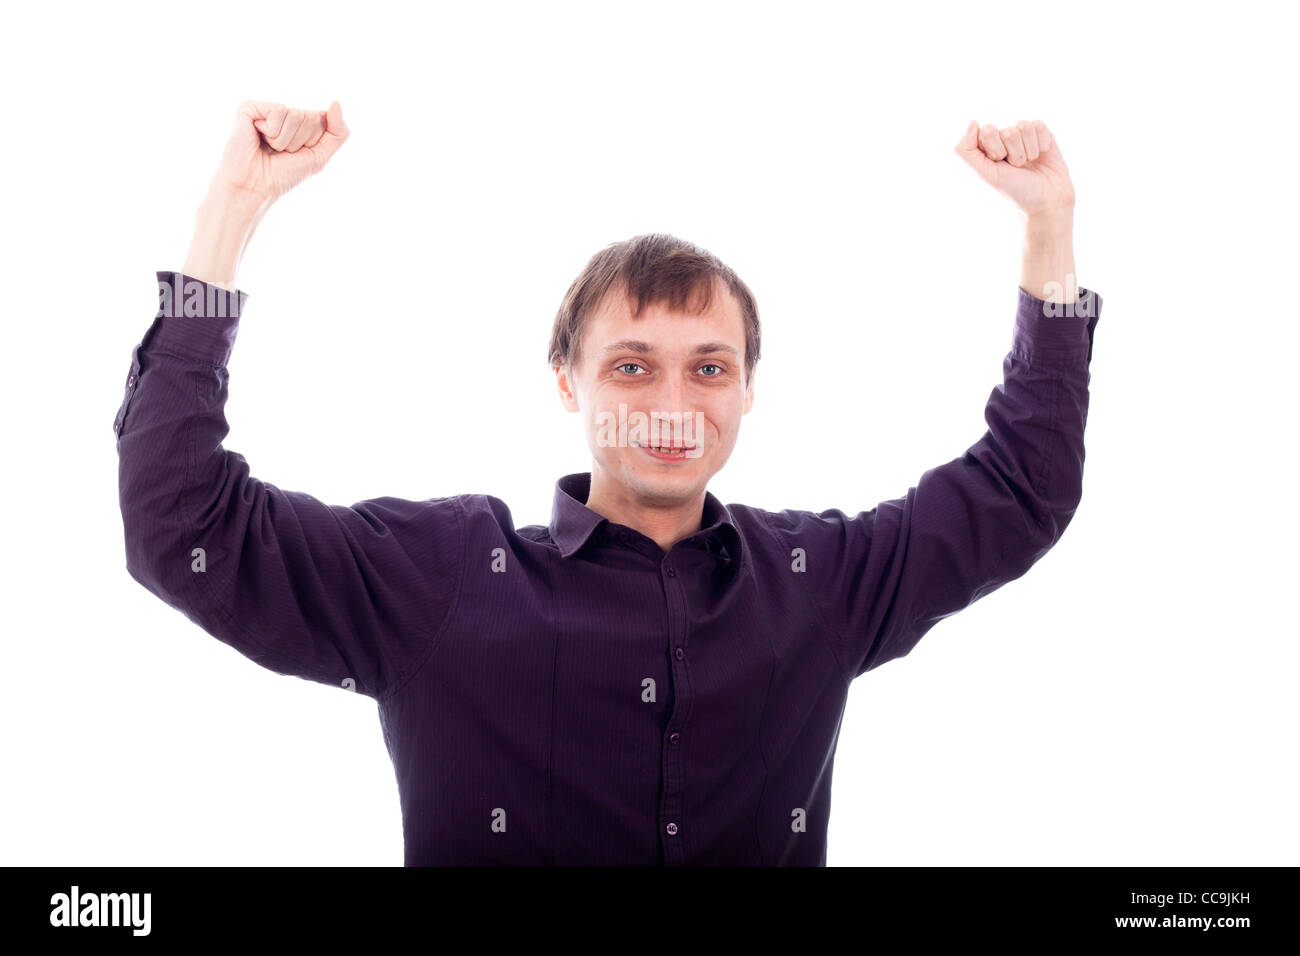 Happy nerd with hands up, isolated on white background. Stock Photo